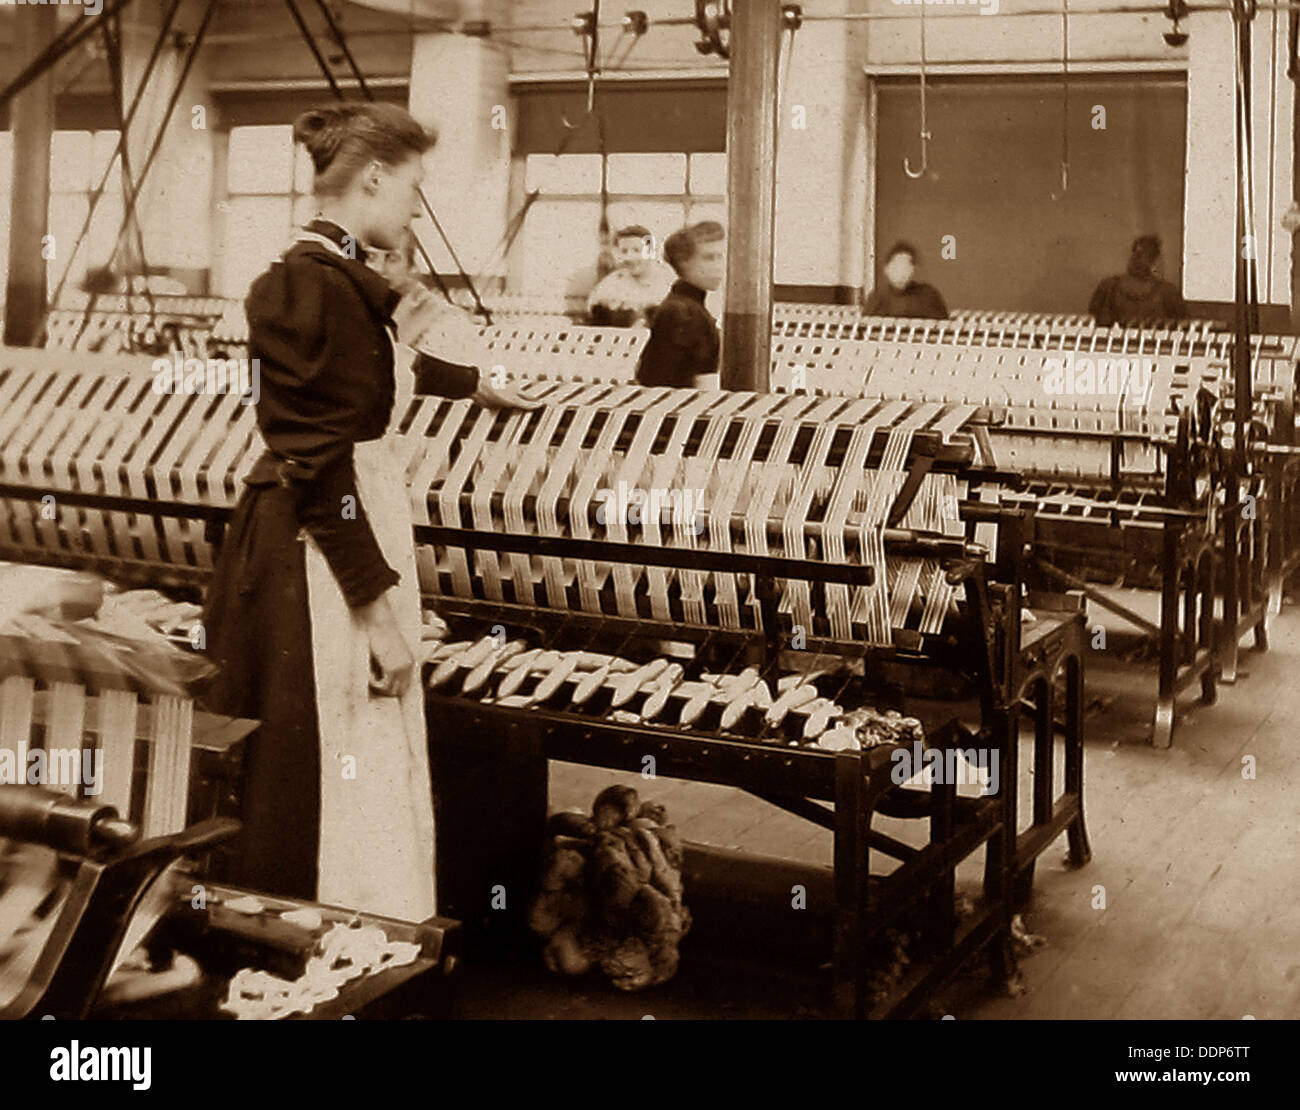 Textile workers early 1900s Stock Photo